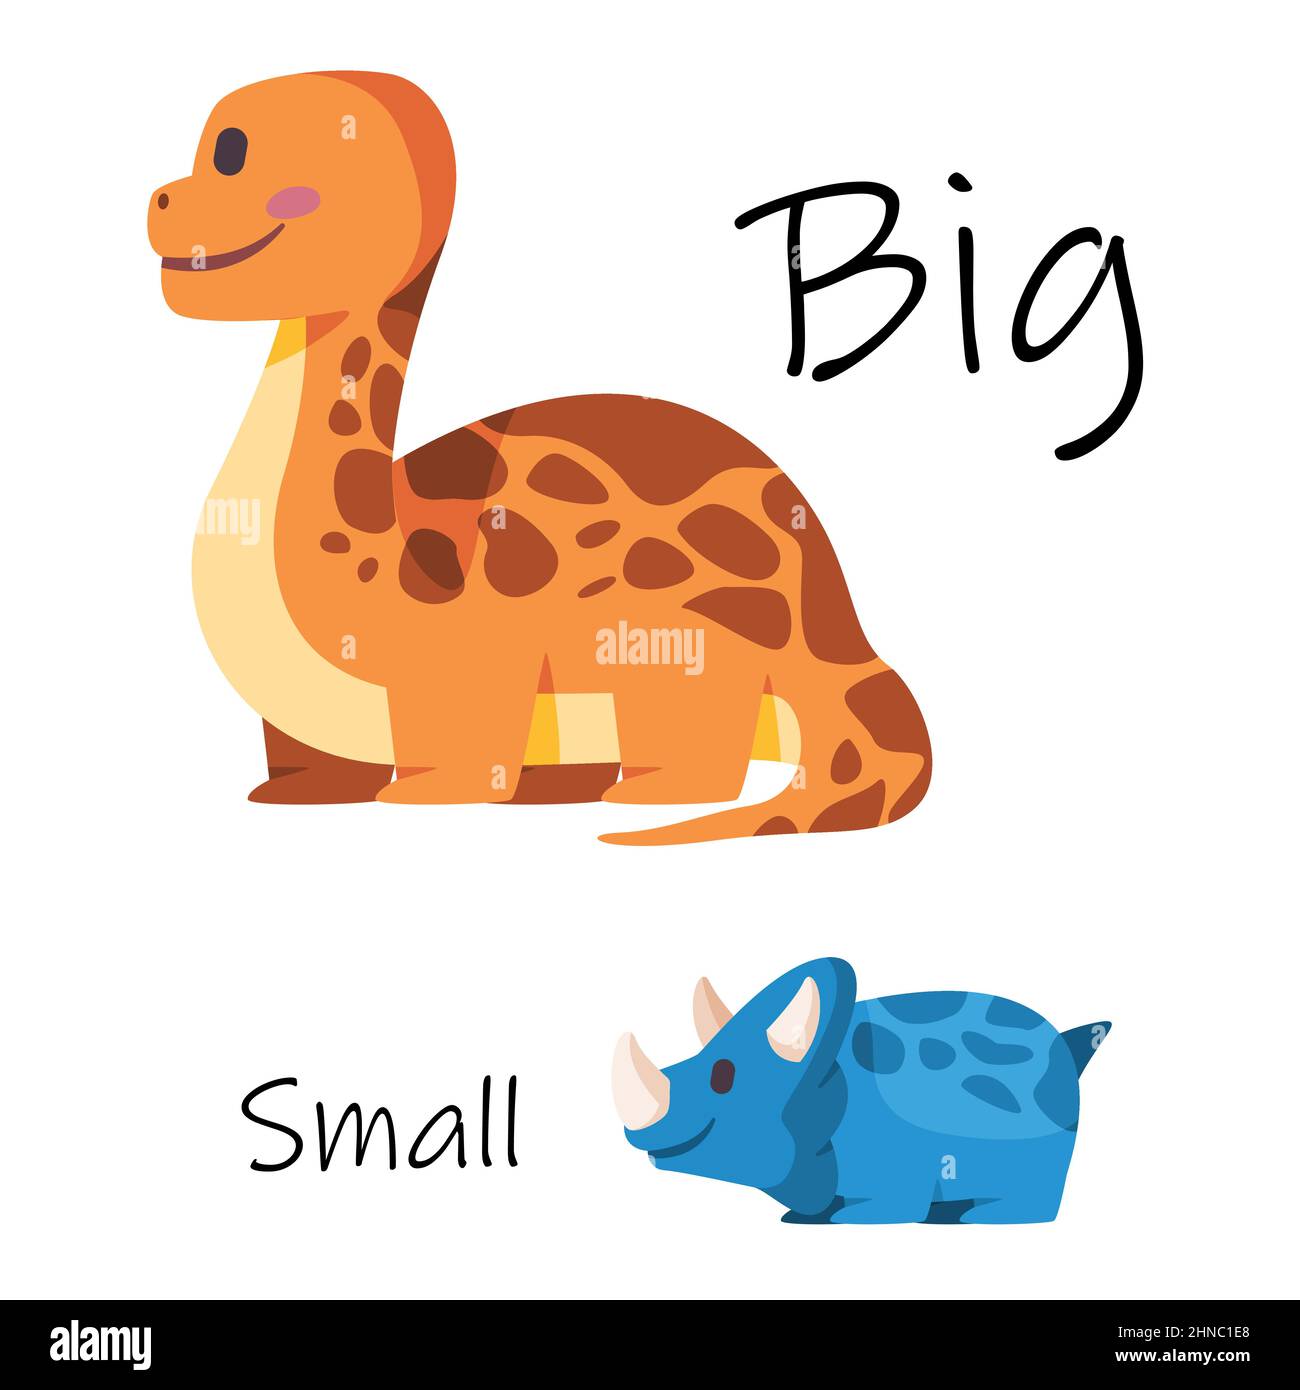 Big vs versus small tiny Cut Out Stock Images & Pictures - Alamy